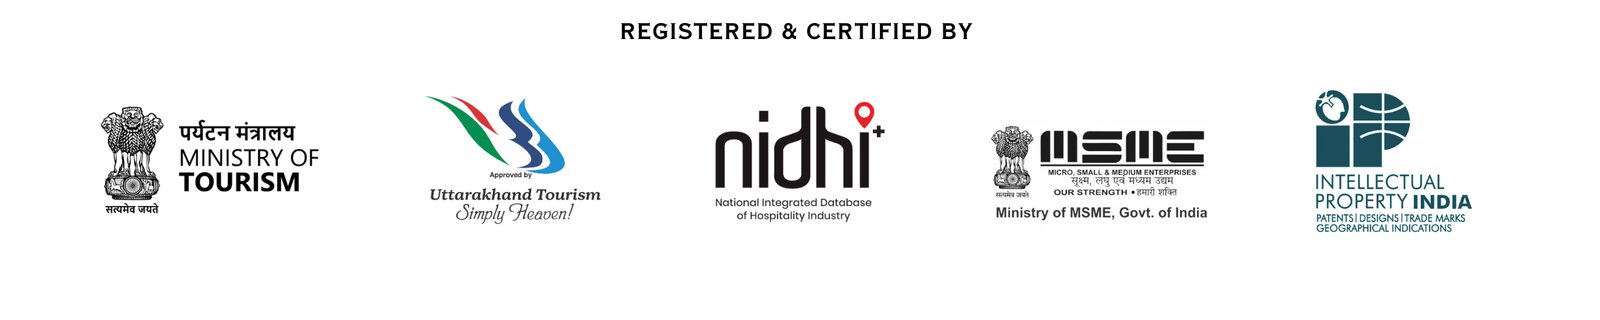 BizareXpedition is Certified by Uttarakhand Tourism, regestered in nidhi tourism of India, etc.